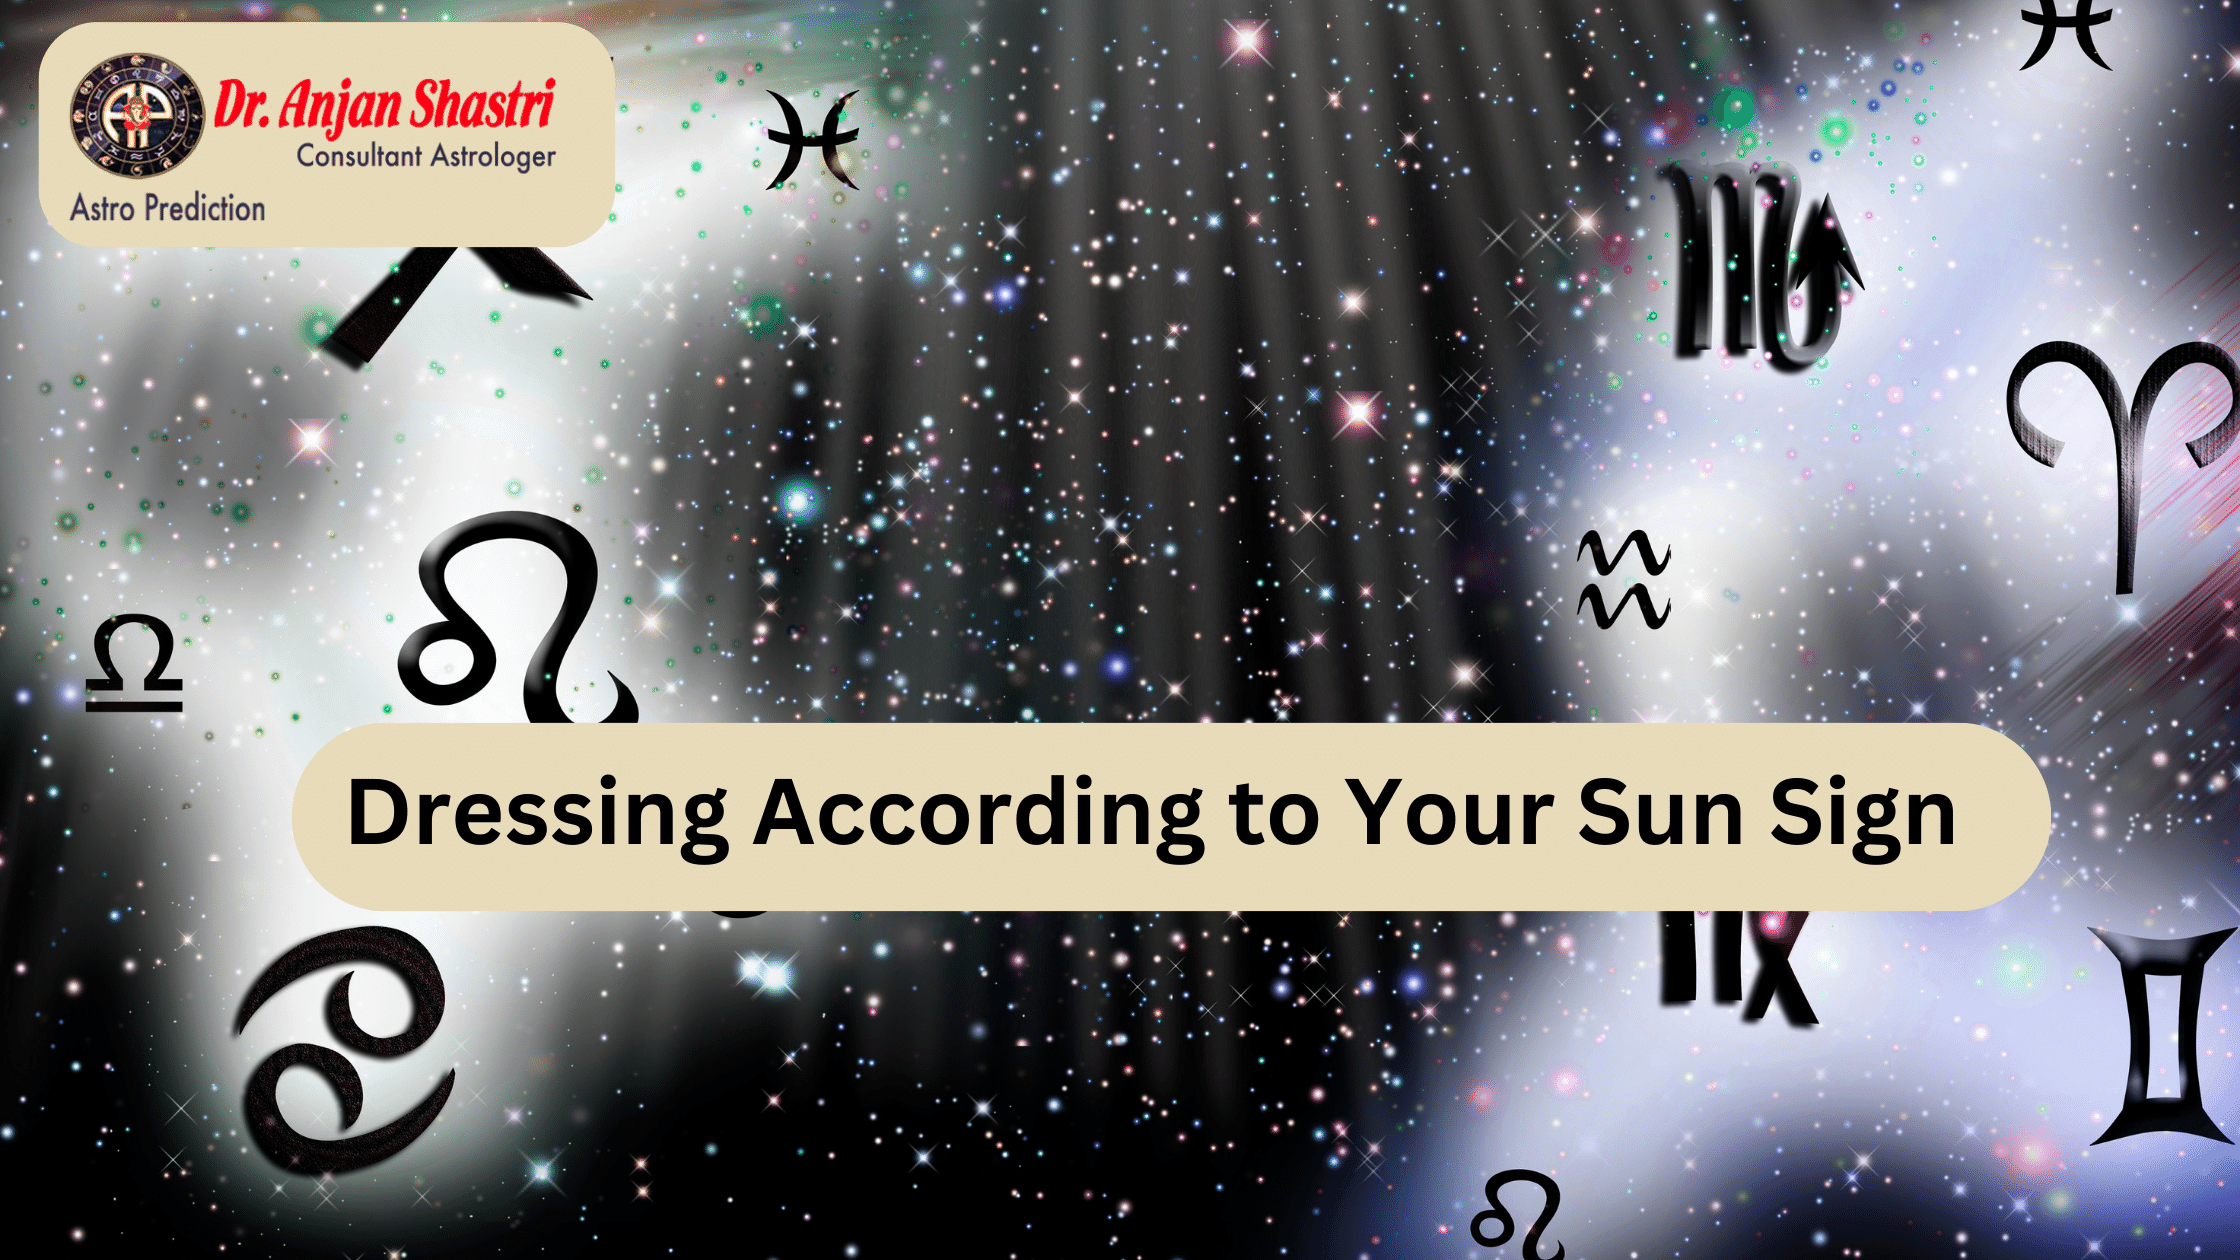 Do you know how to dress According to Your Sun Sign